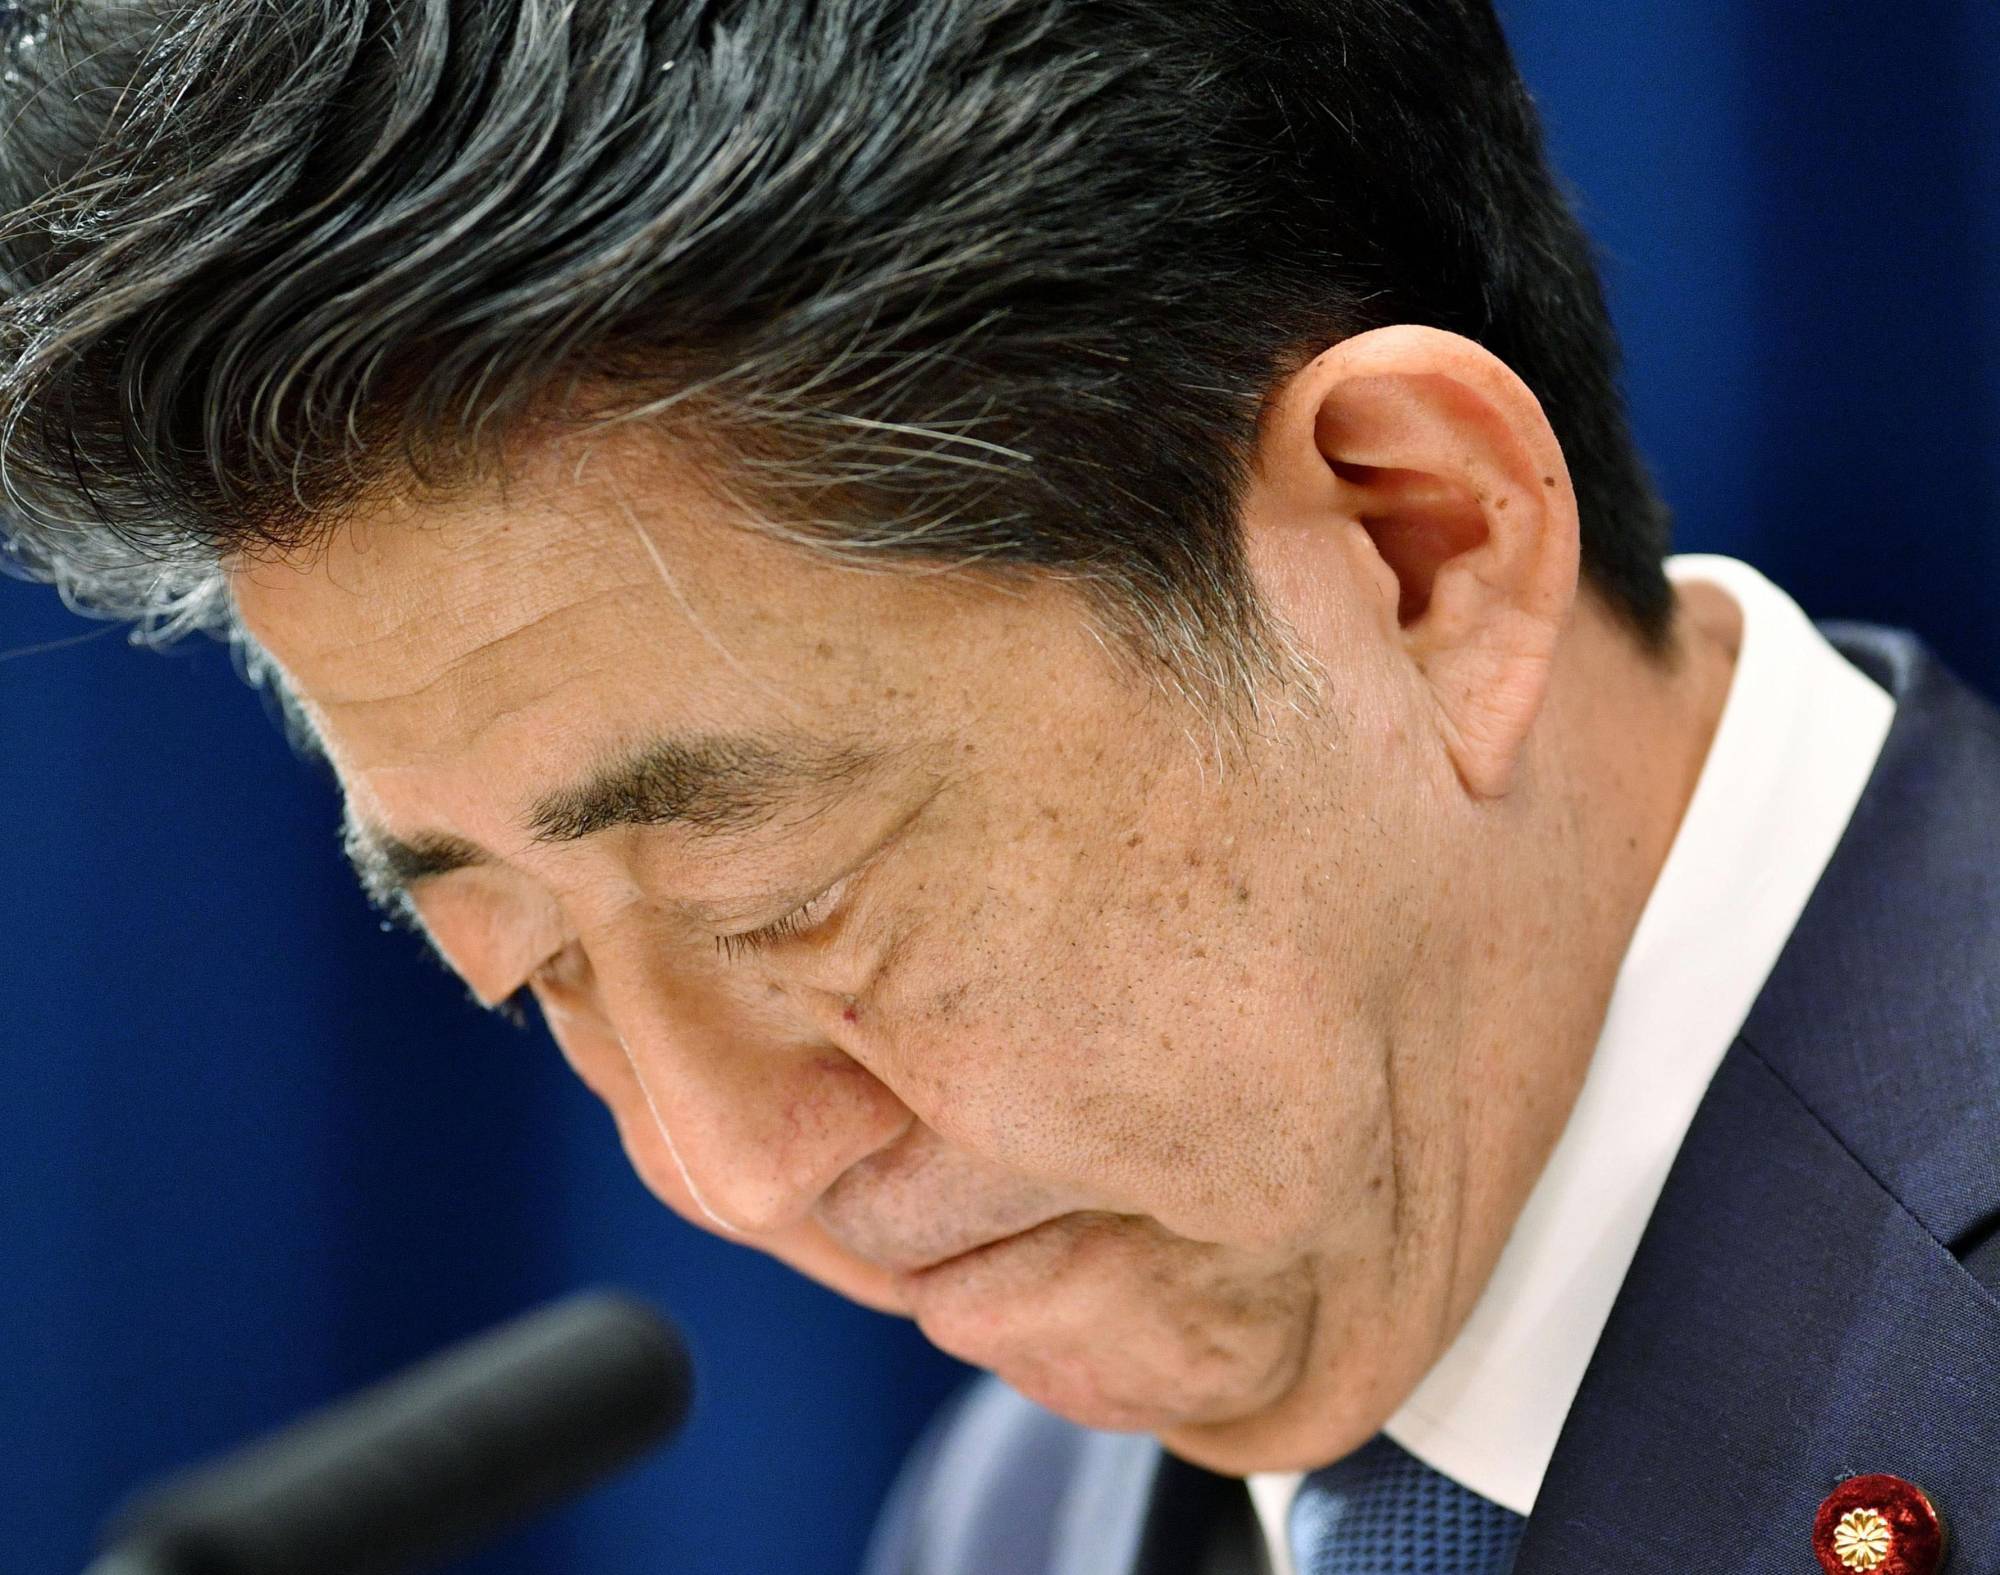 Bowing out: Prime Minister Shinzo Abe bows after announcing his intention to resign on Aug. 28. | KYODO